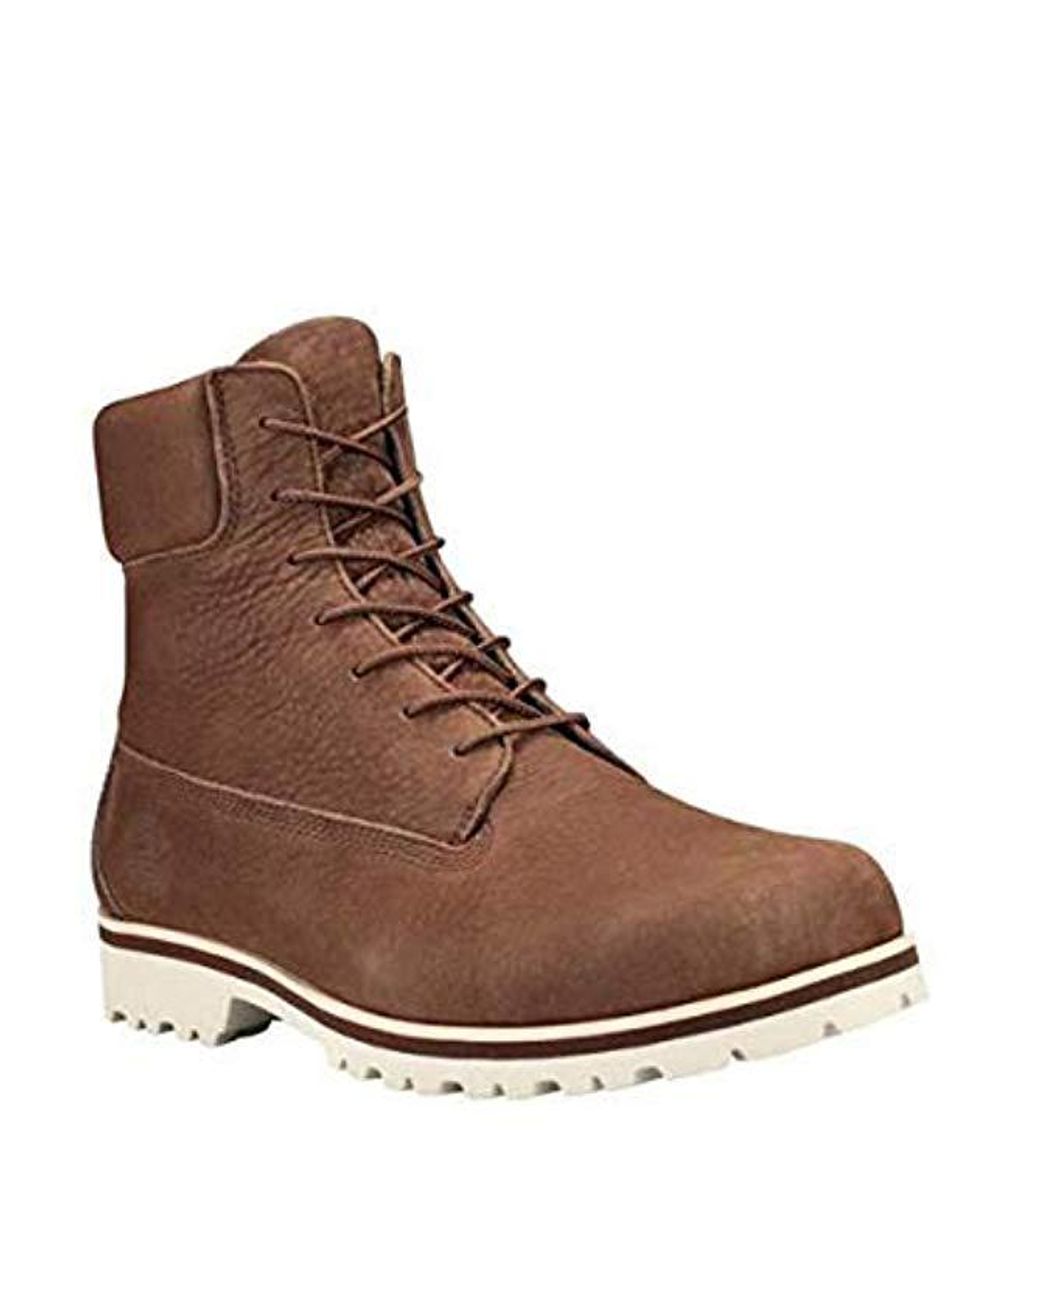 Timberland Chilmark 6, Boot For in Brown for Men - Lyst